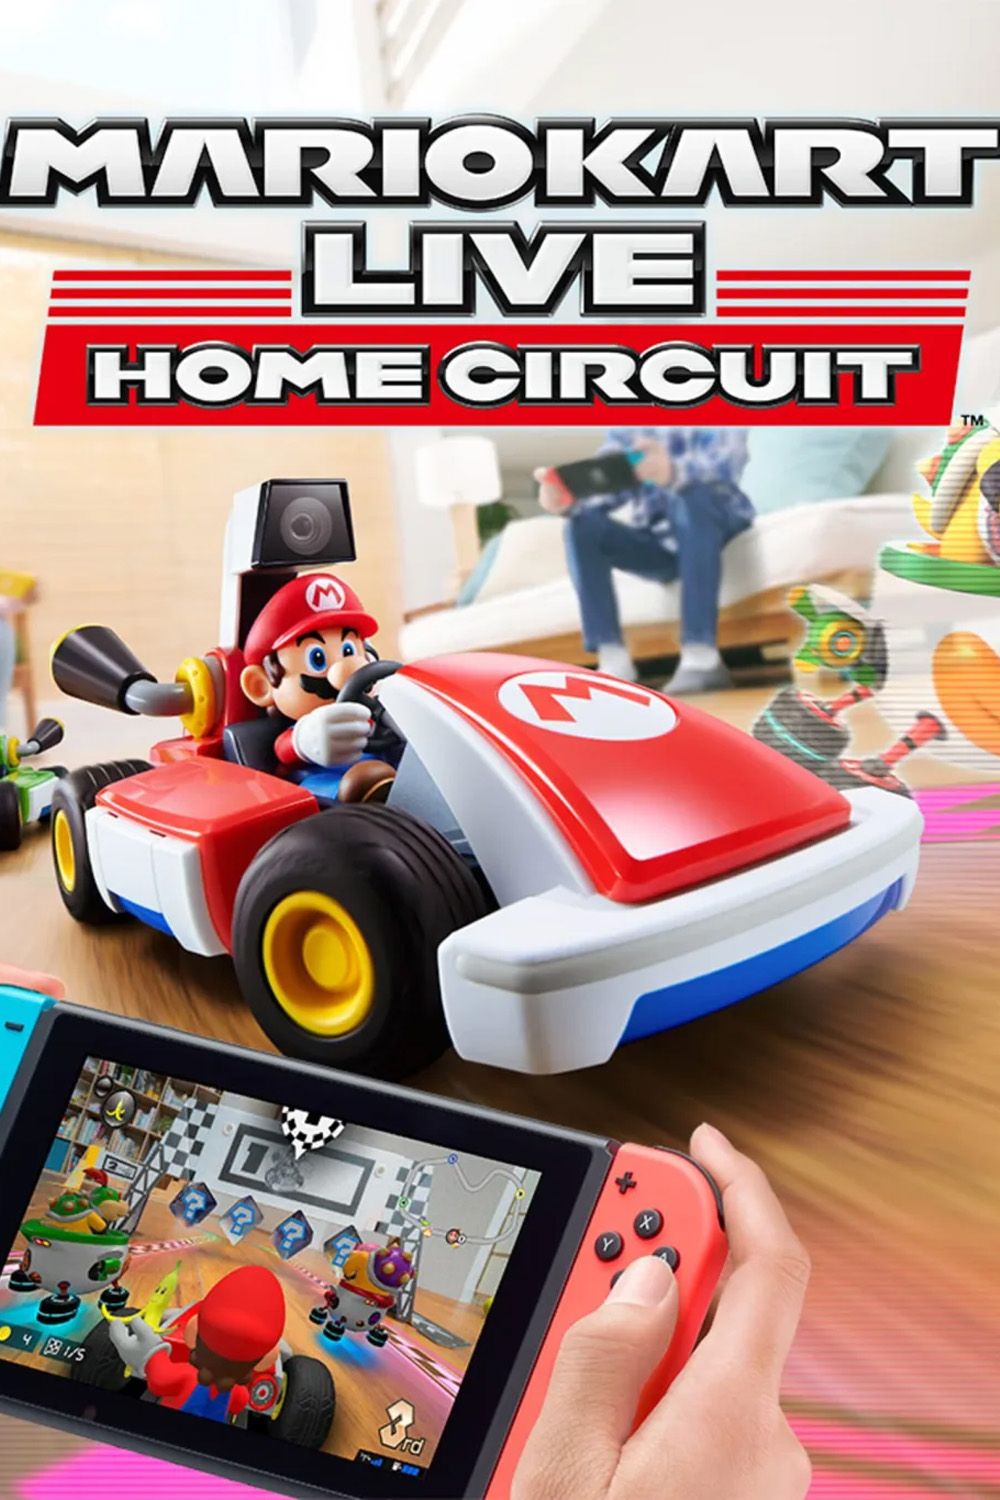 Mario Kart Live: Home Circuit Brings The Series Into The Real World